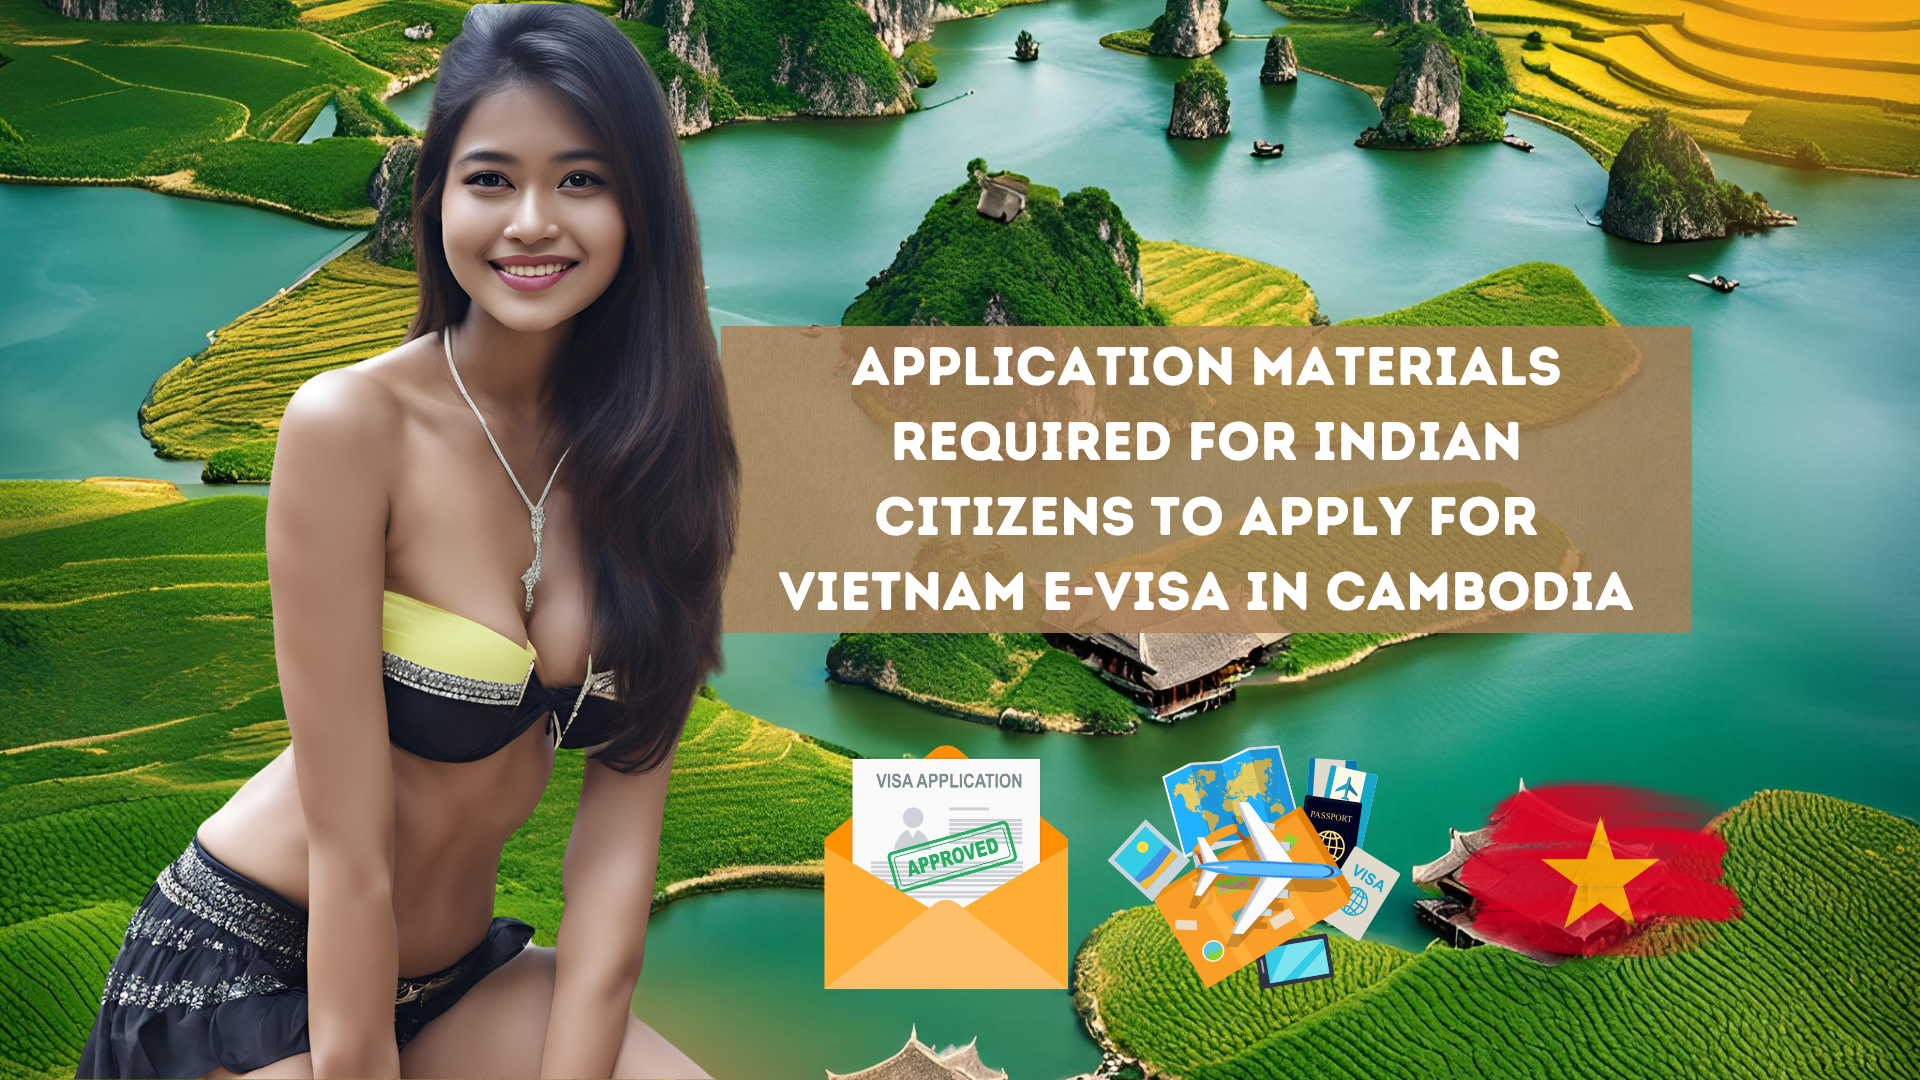 Application materials required for Indian citizens to apply for Vietnam e-visa in Cambodia